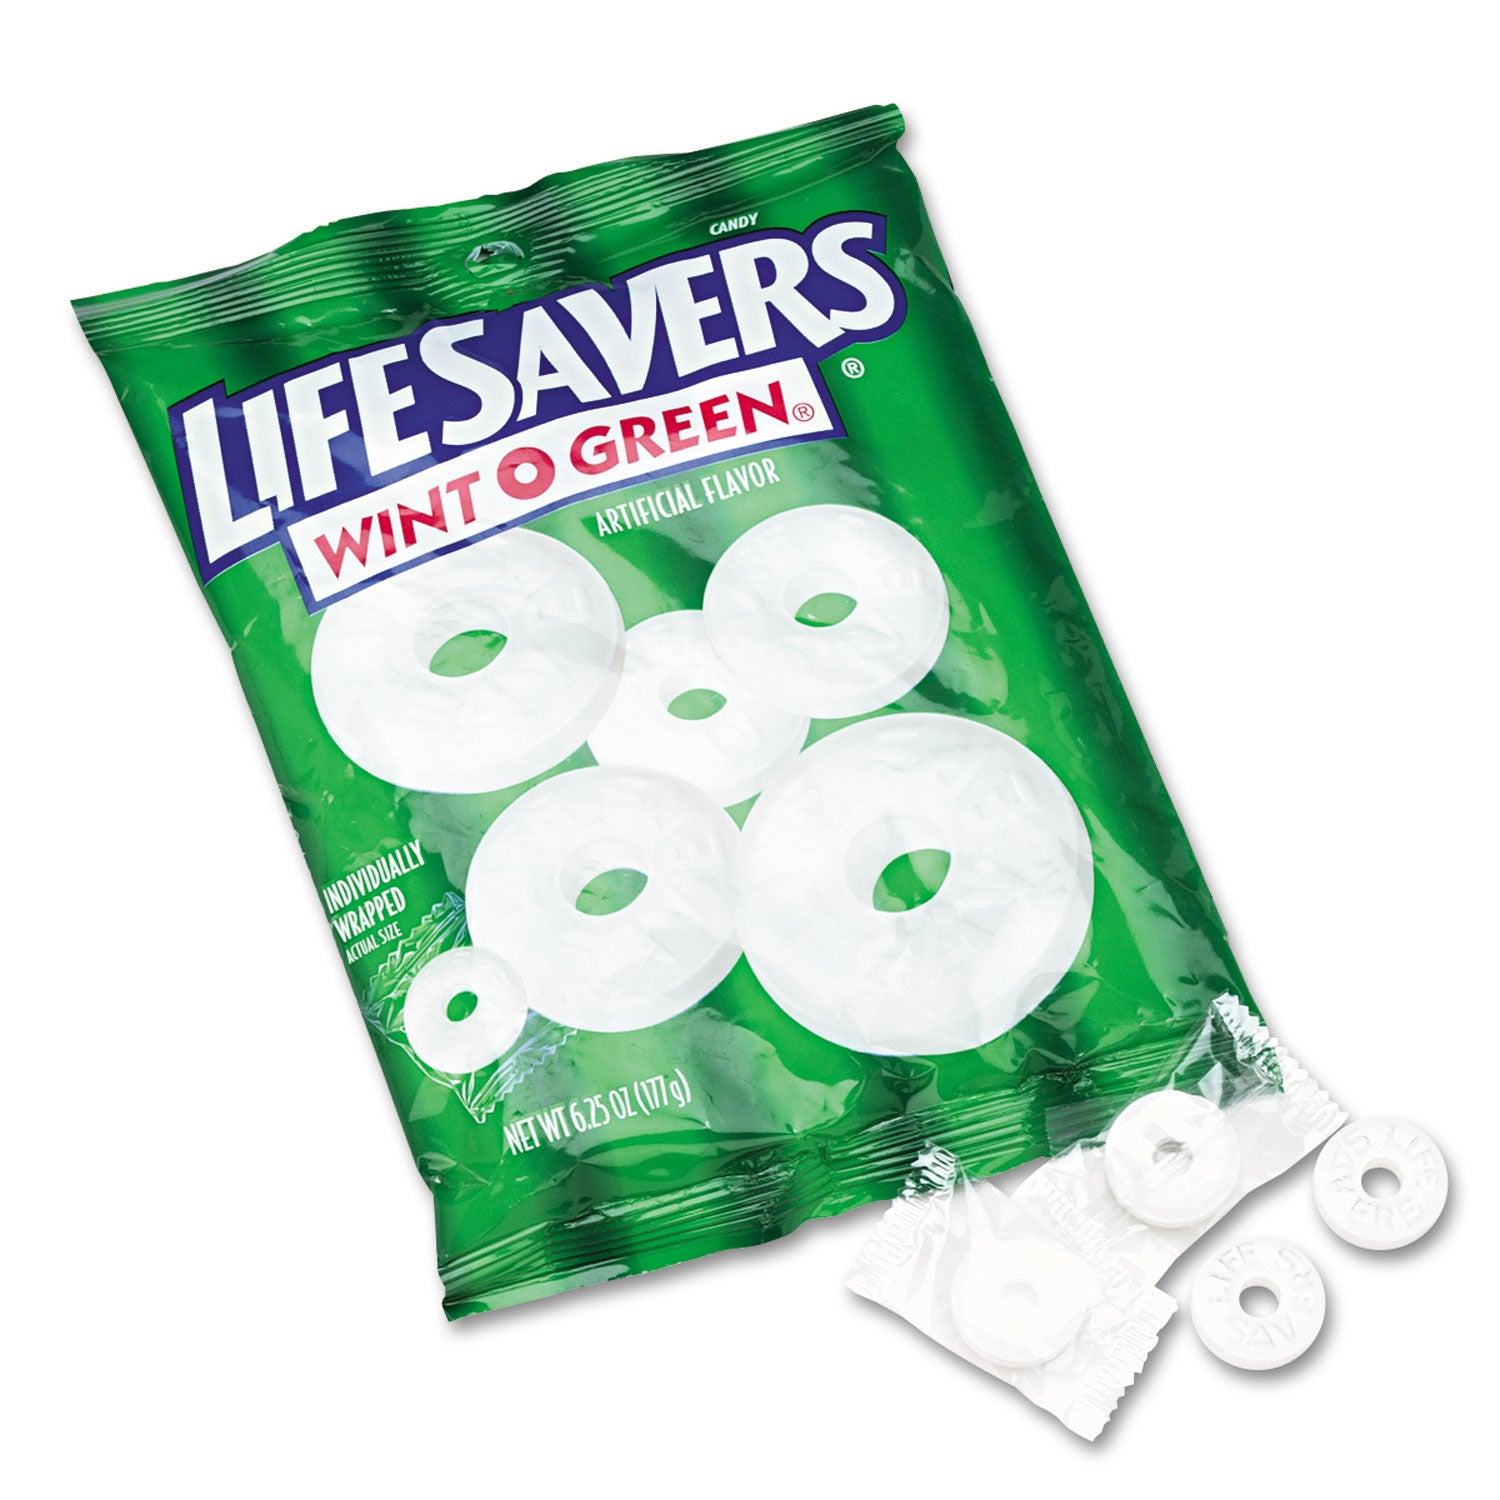 hard-candy-mints-wint-o-green-individually-wrapped-625-oz-bag_lfs88504 - 1